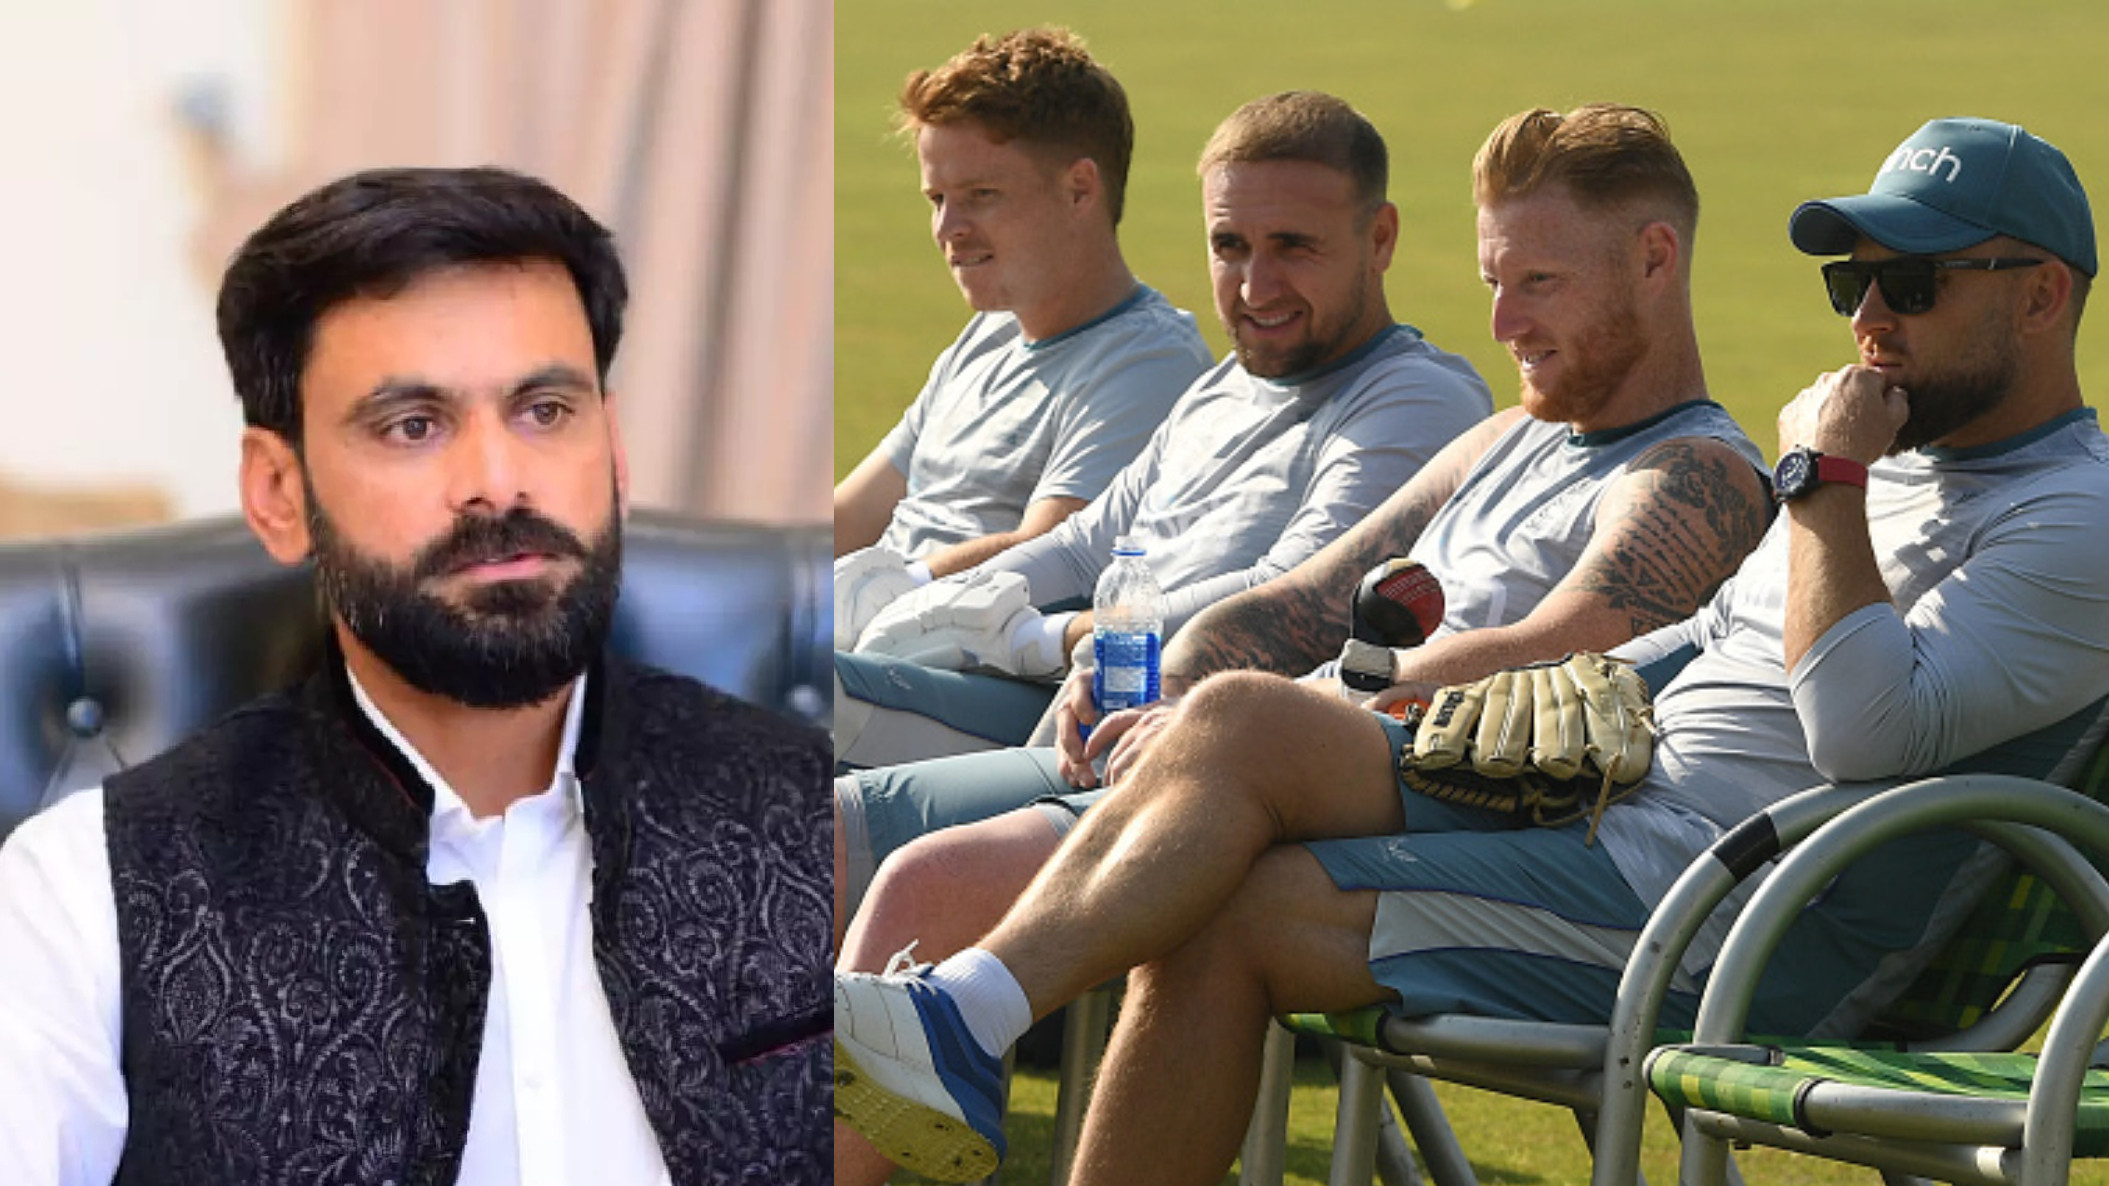 PAK v ENG 2022: Mohammad Hafeez blasted on Twitter after his ‘low immunity’ jibe at England for stomach bug illness